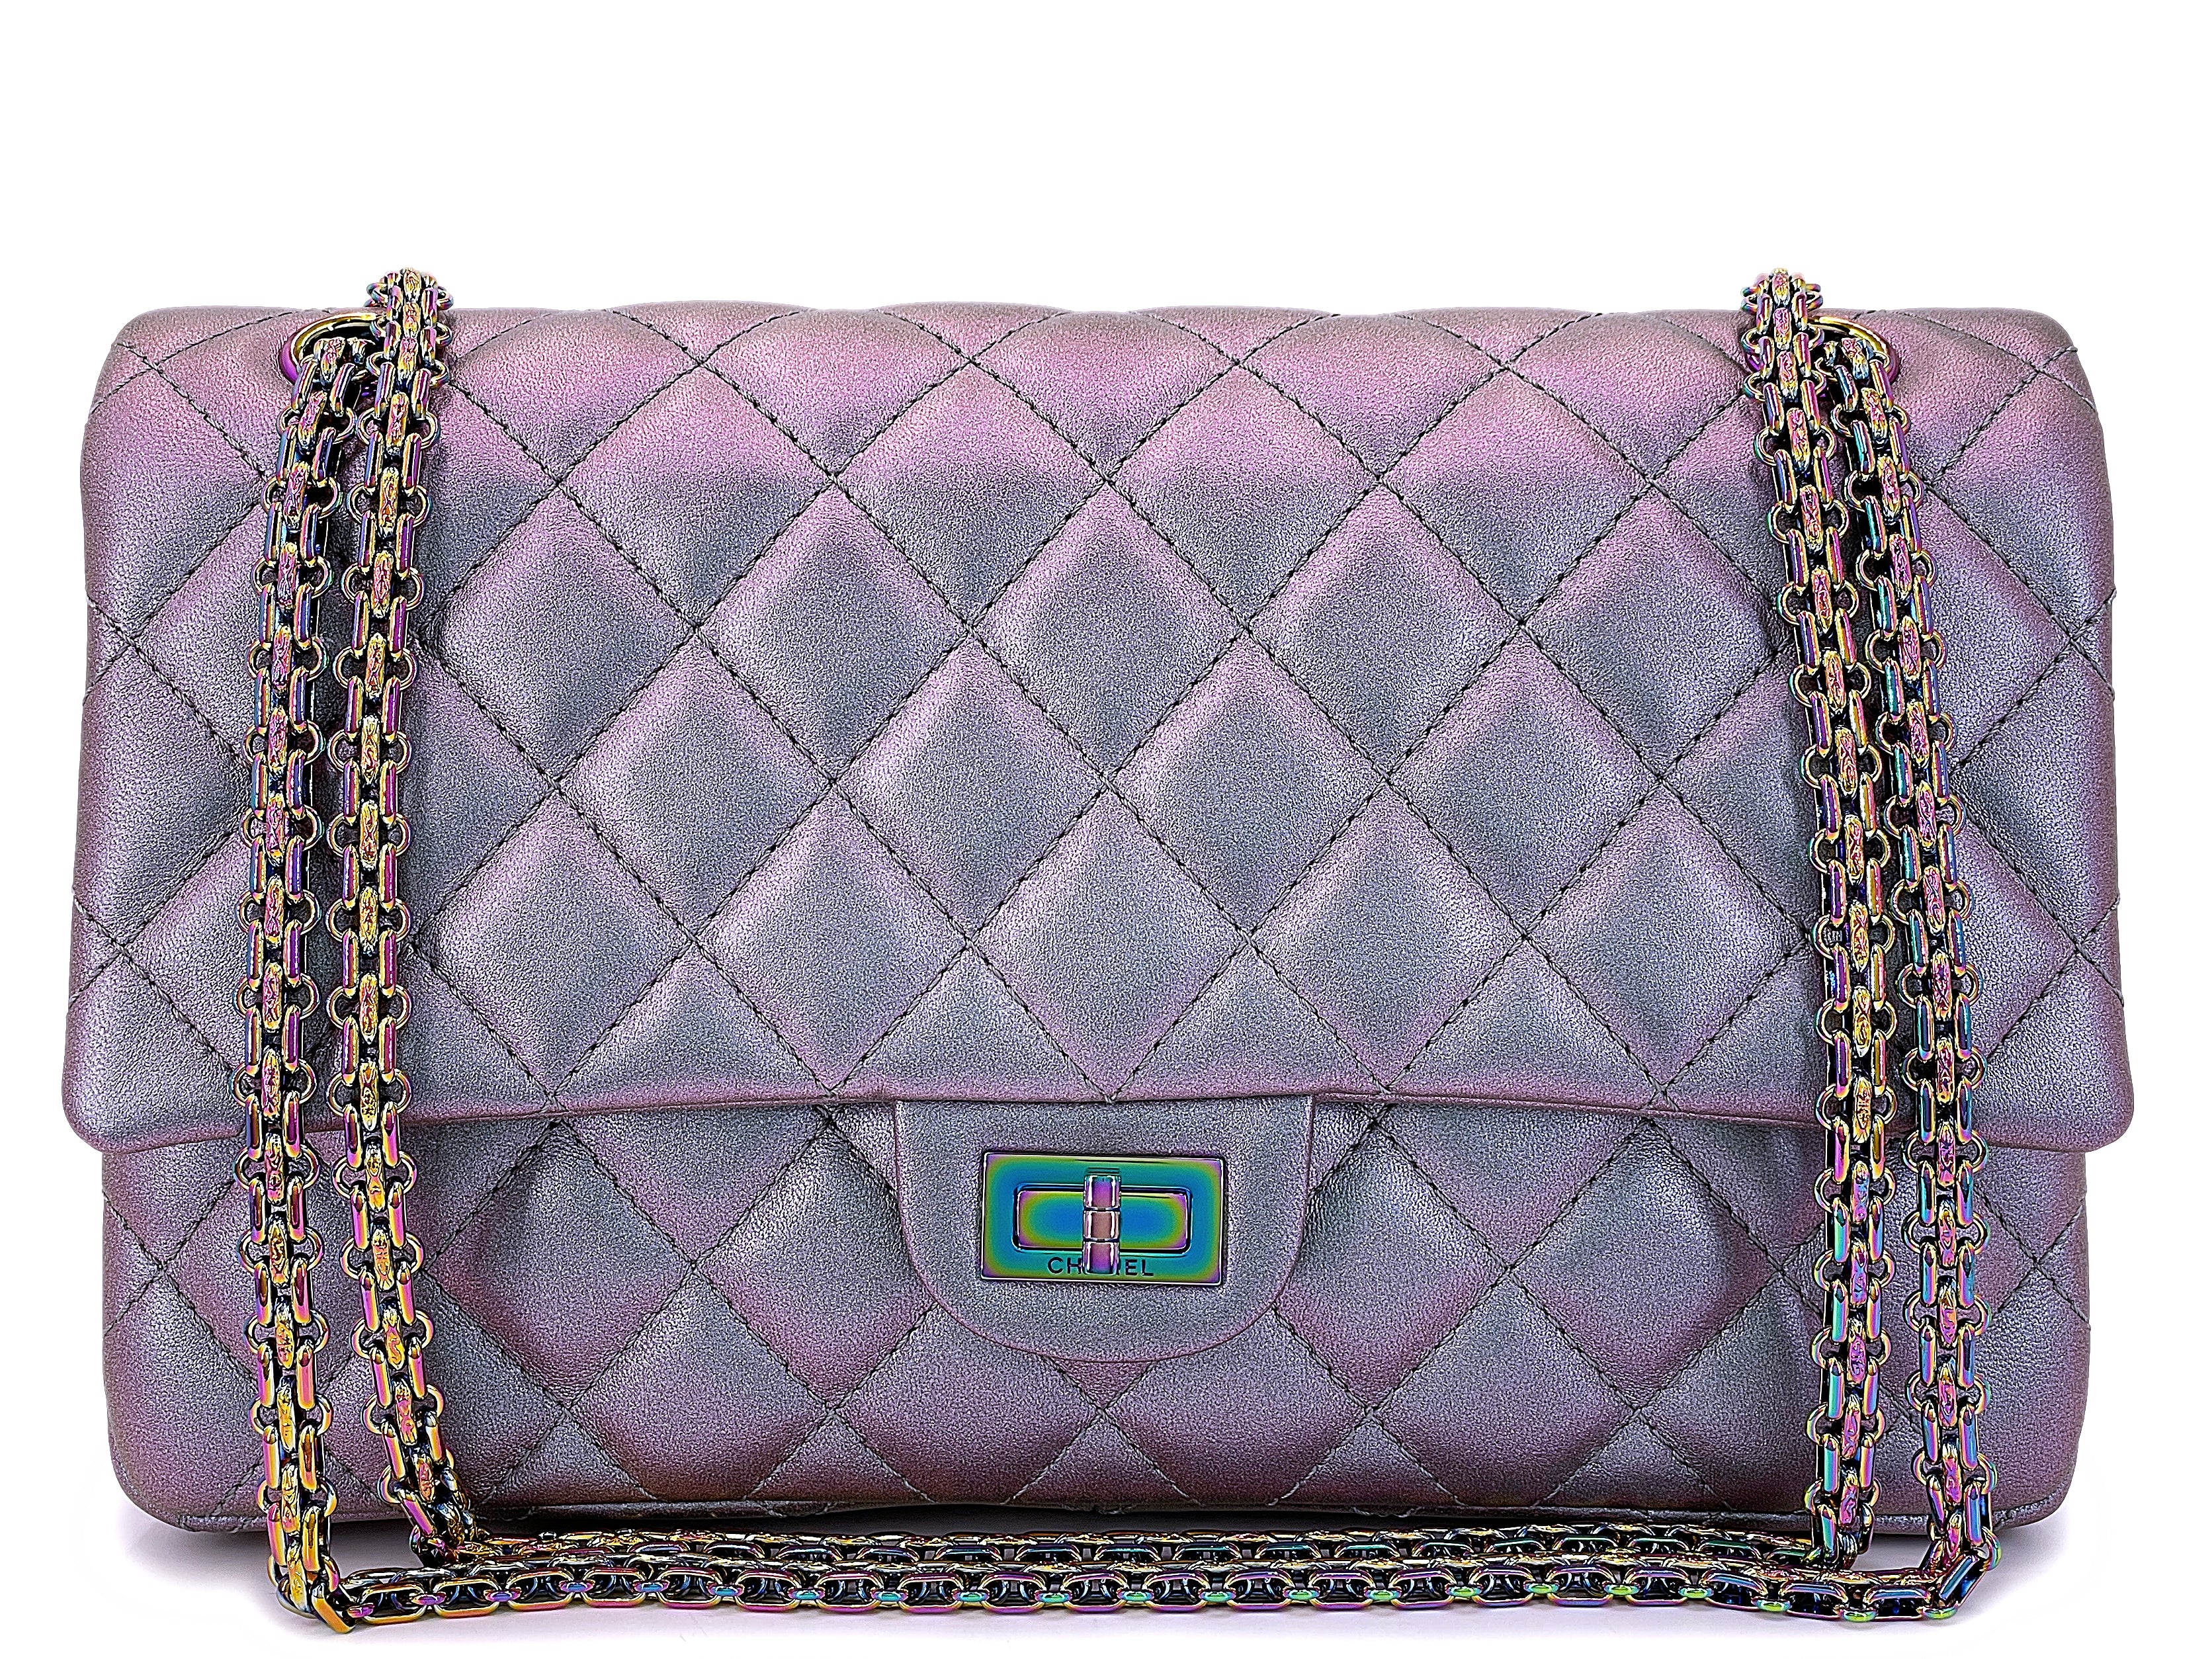 Chanel Metallic Pink Quilted Aged Calfskin Reissue 2.55 225 Double Flap Bag  Rare